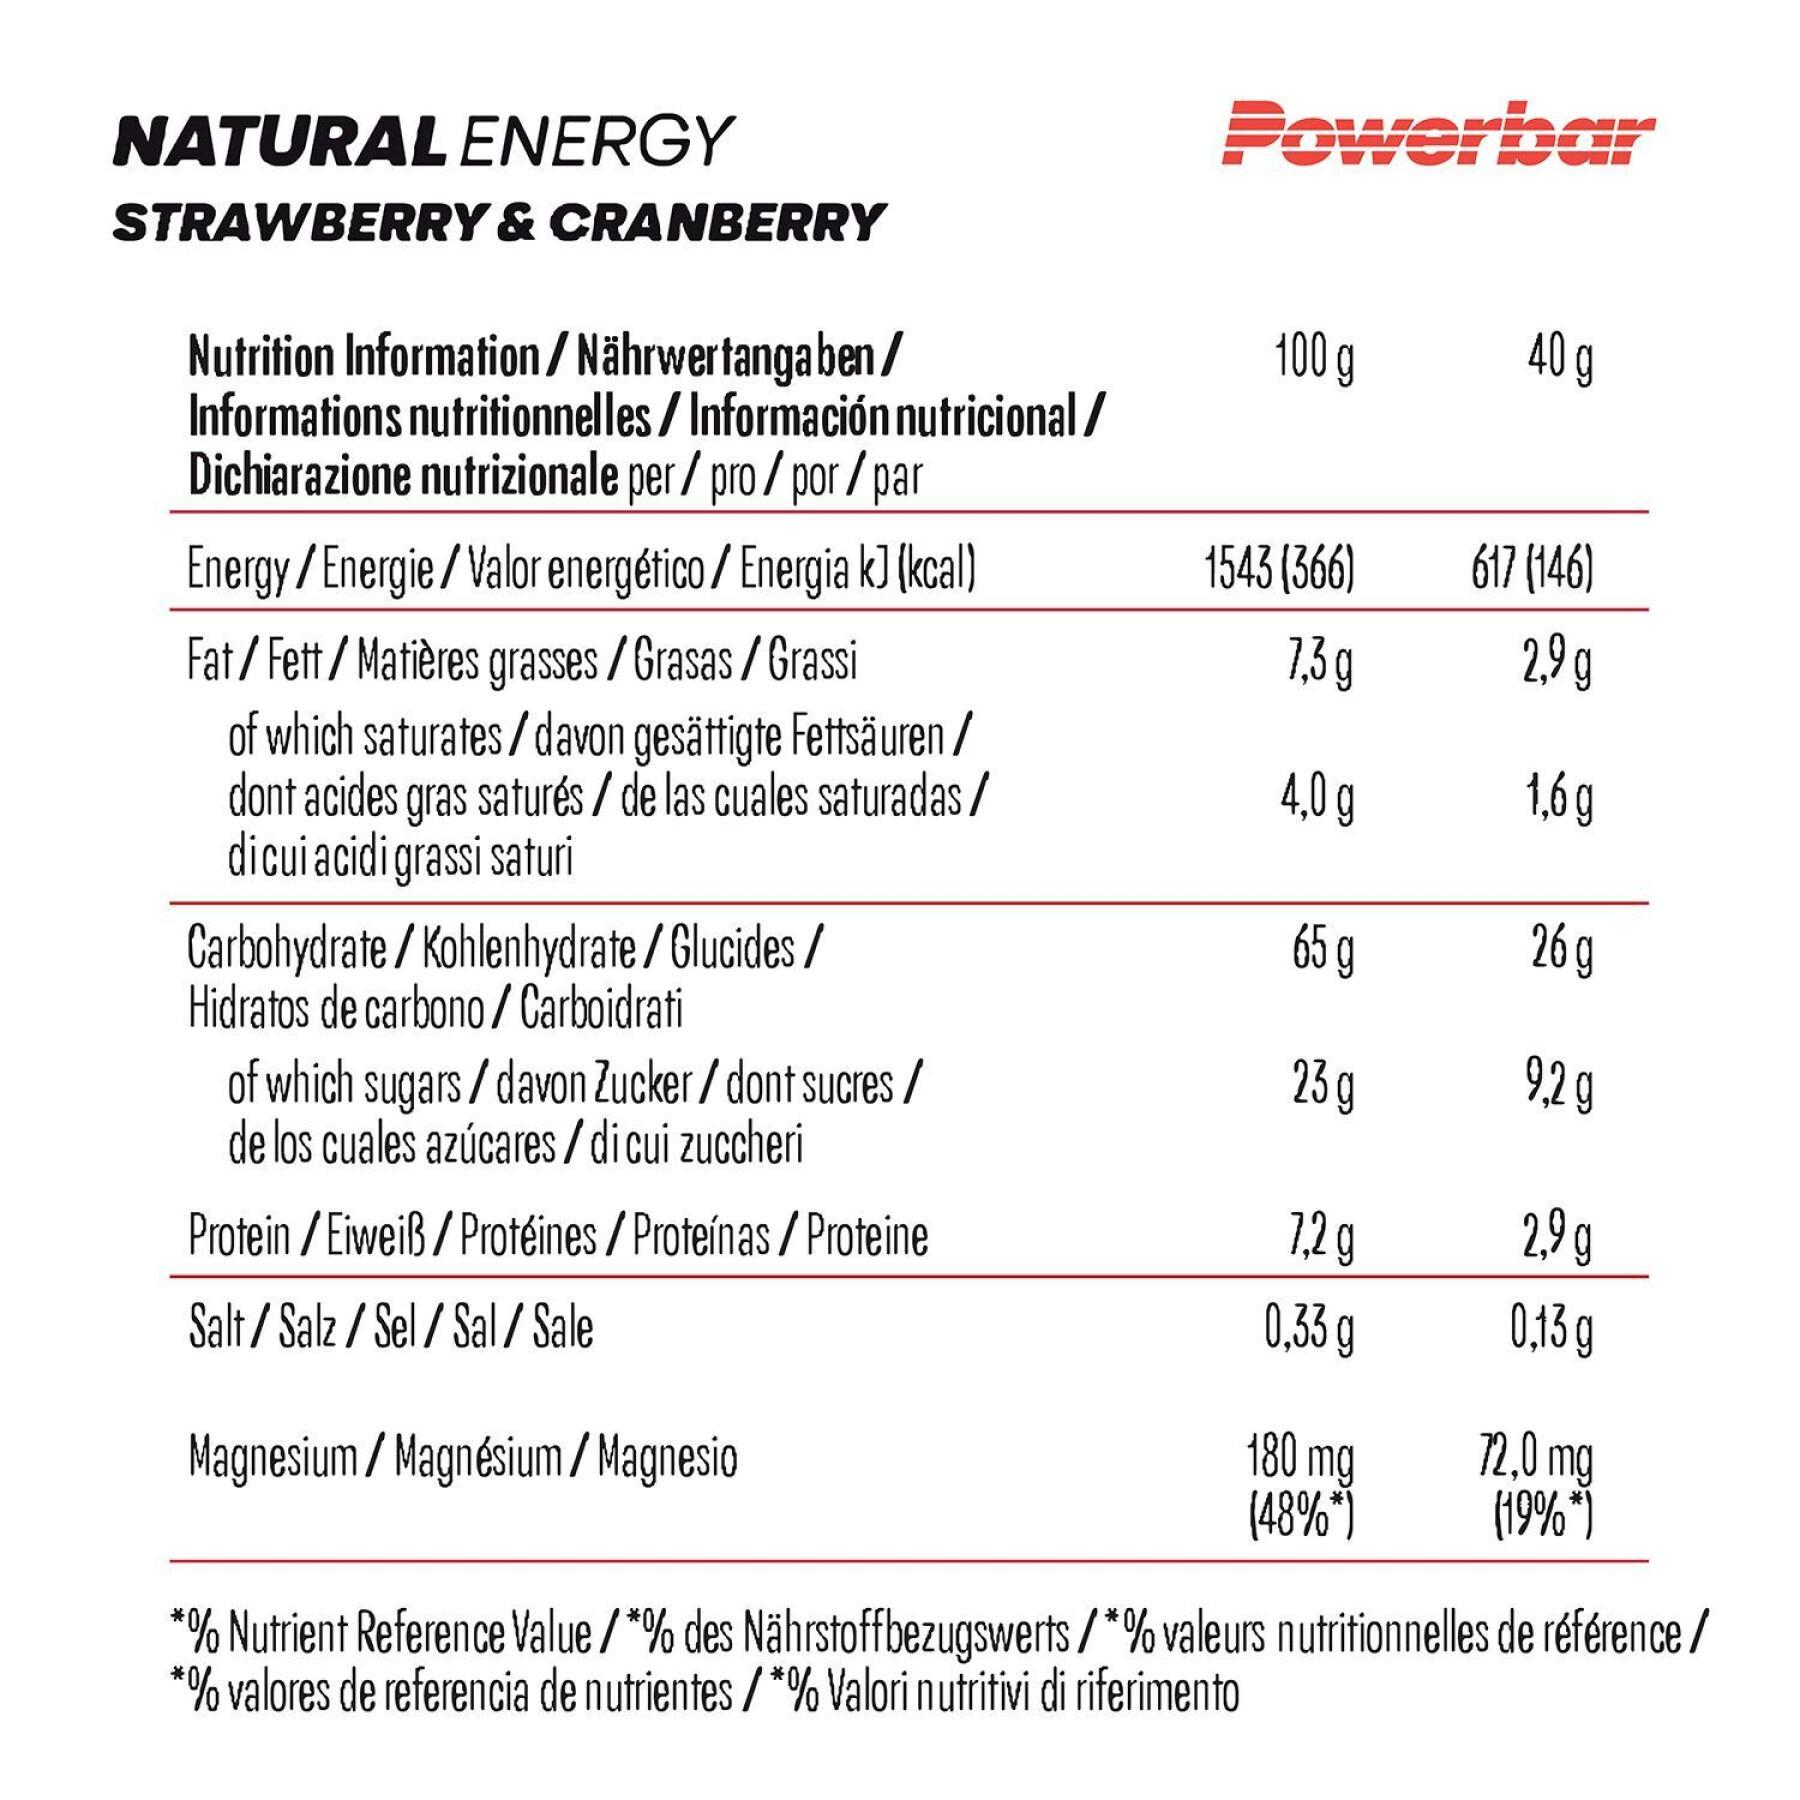 Pack of 18 nutrition bars PowerBar Natural Energy Cereal